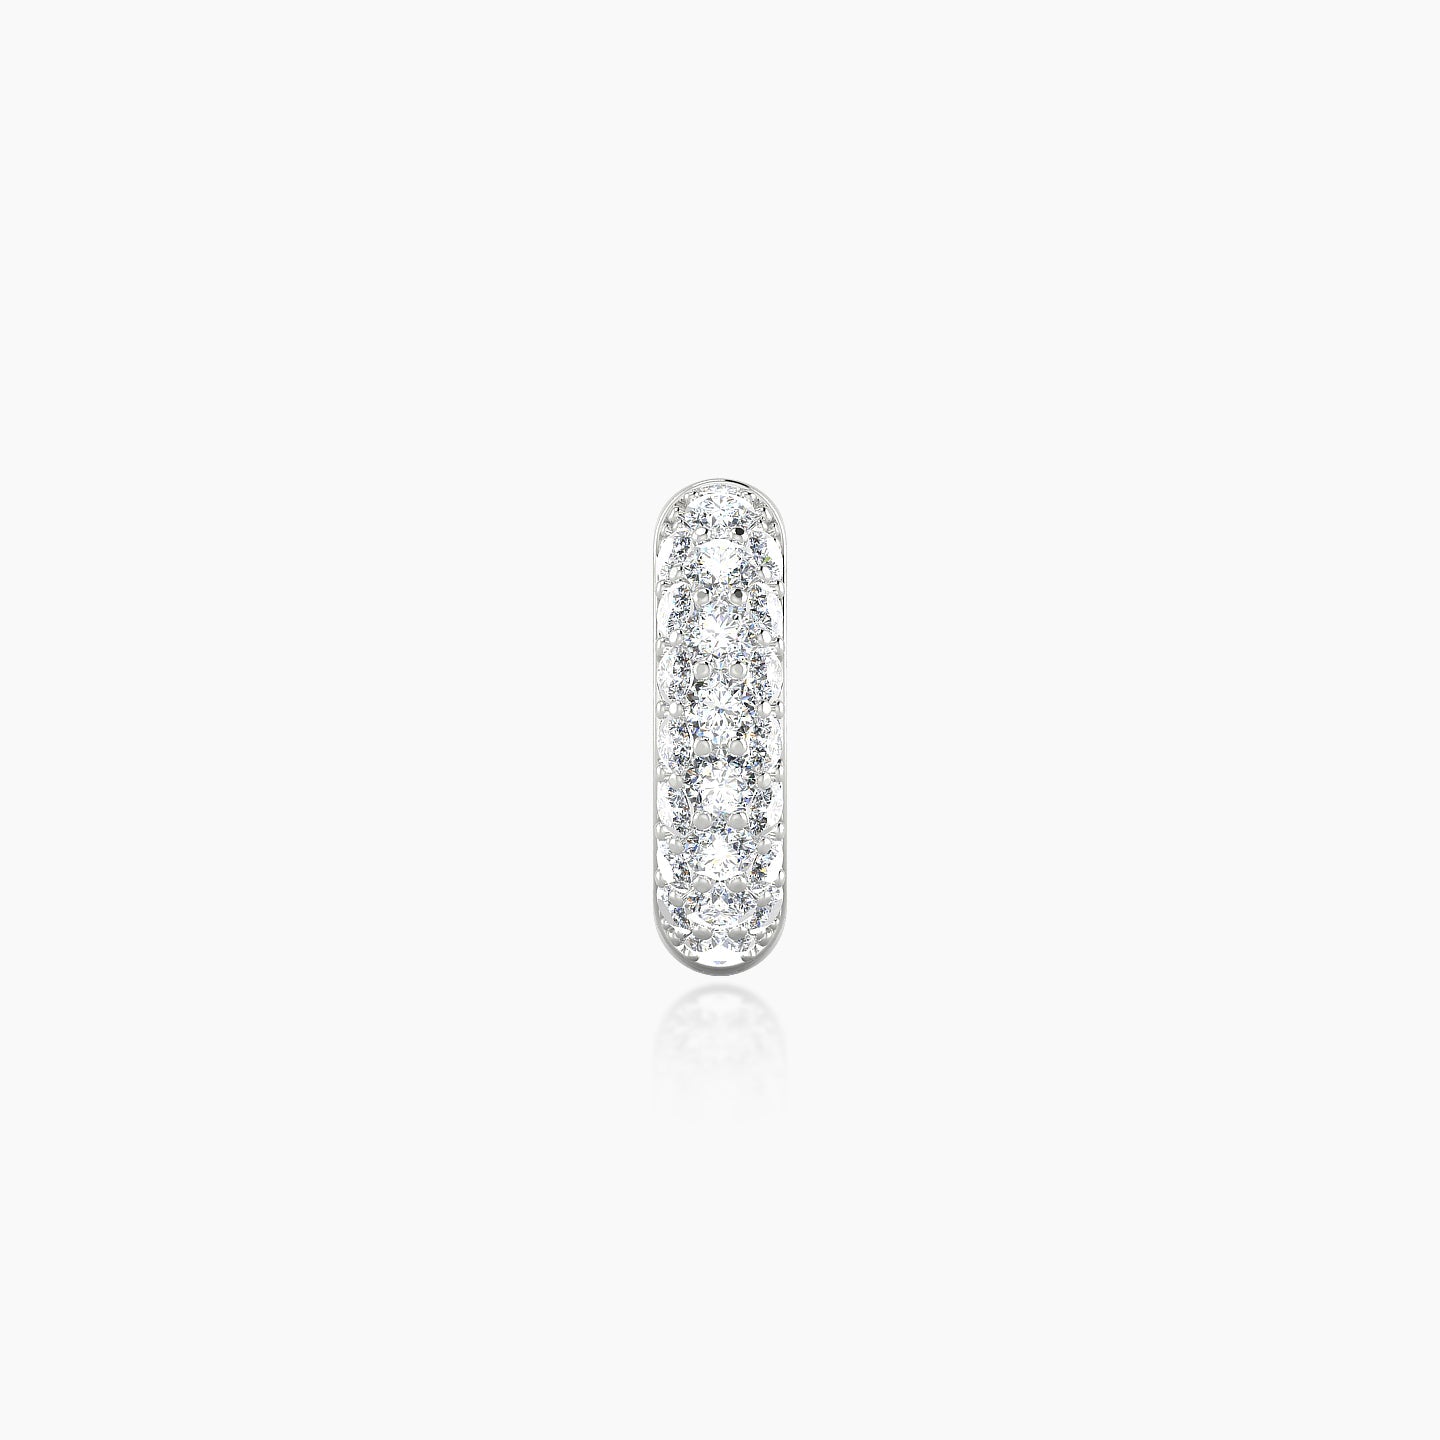 Theia | 18k White Gold 6.5 mm Pave Diamond Nose Ring Piercing